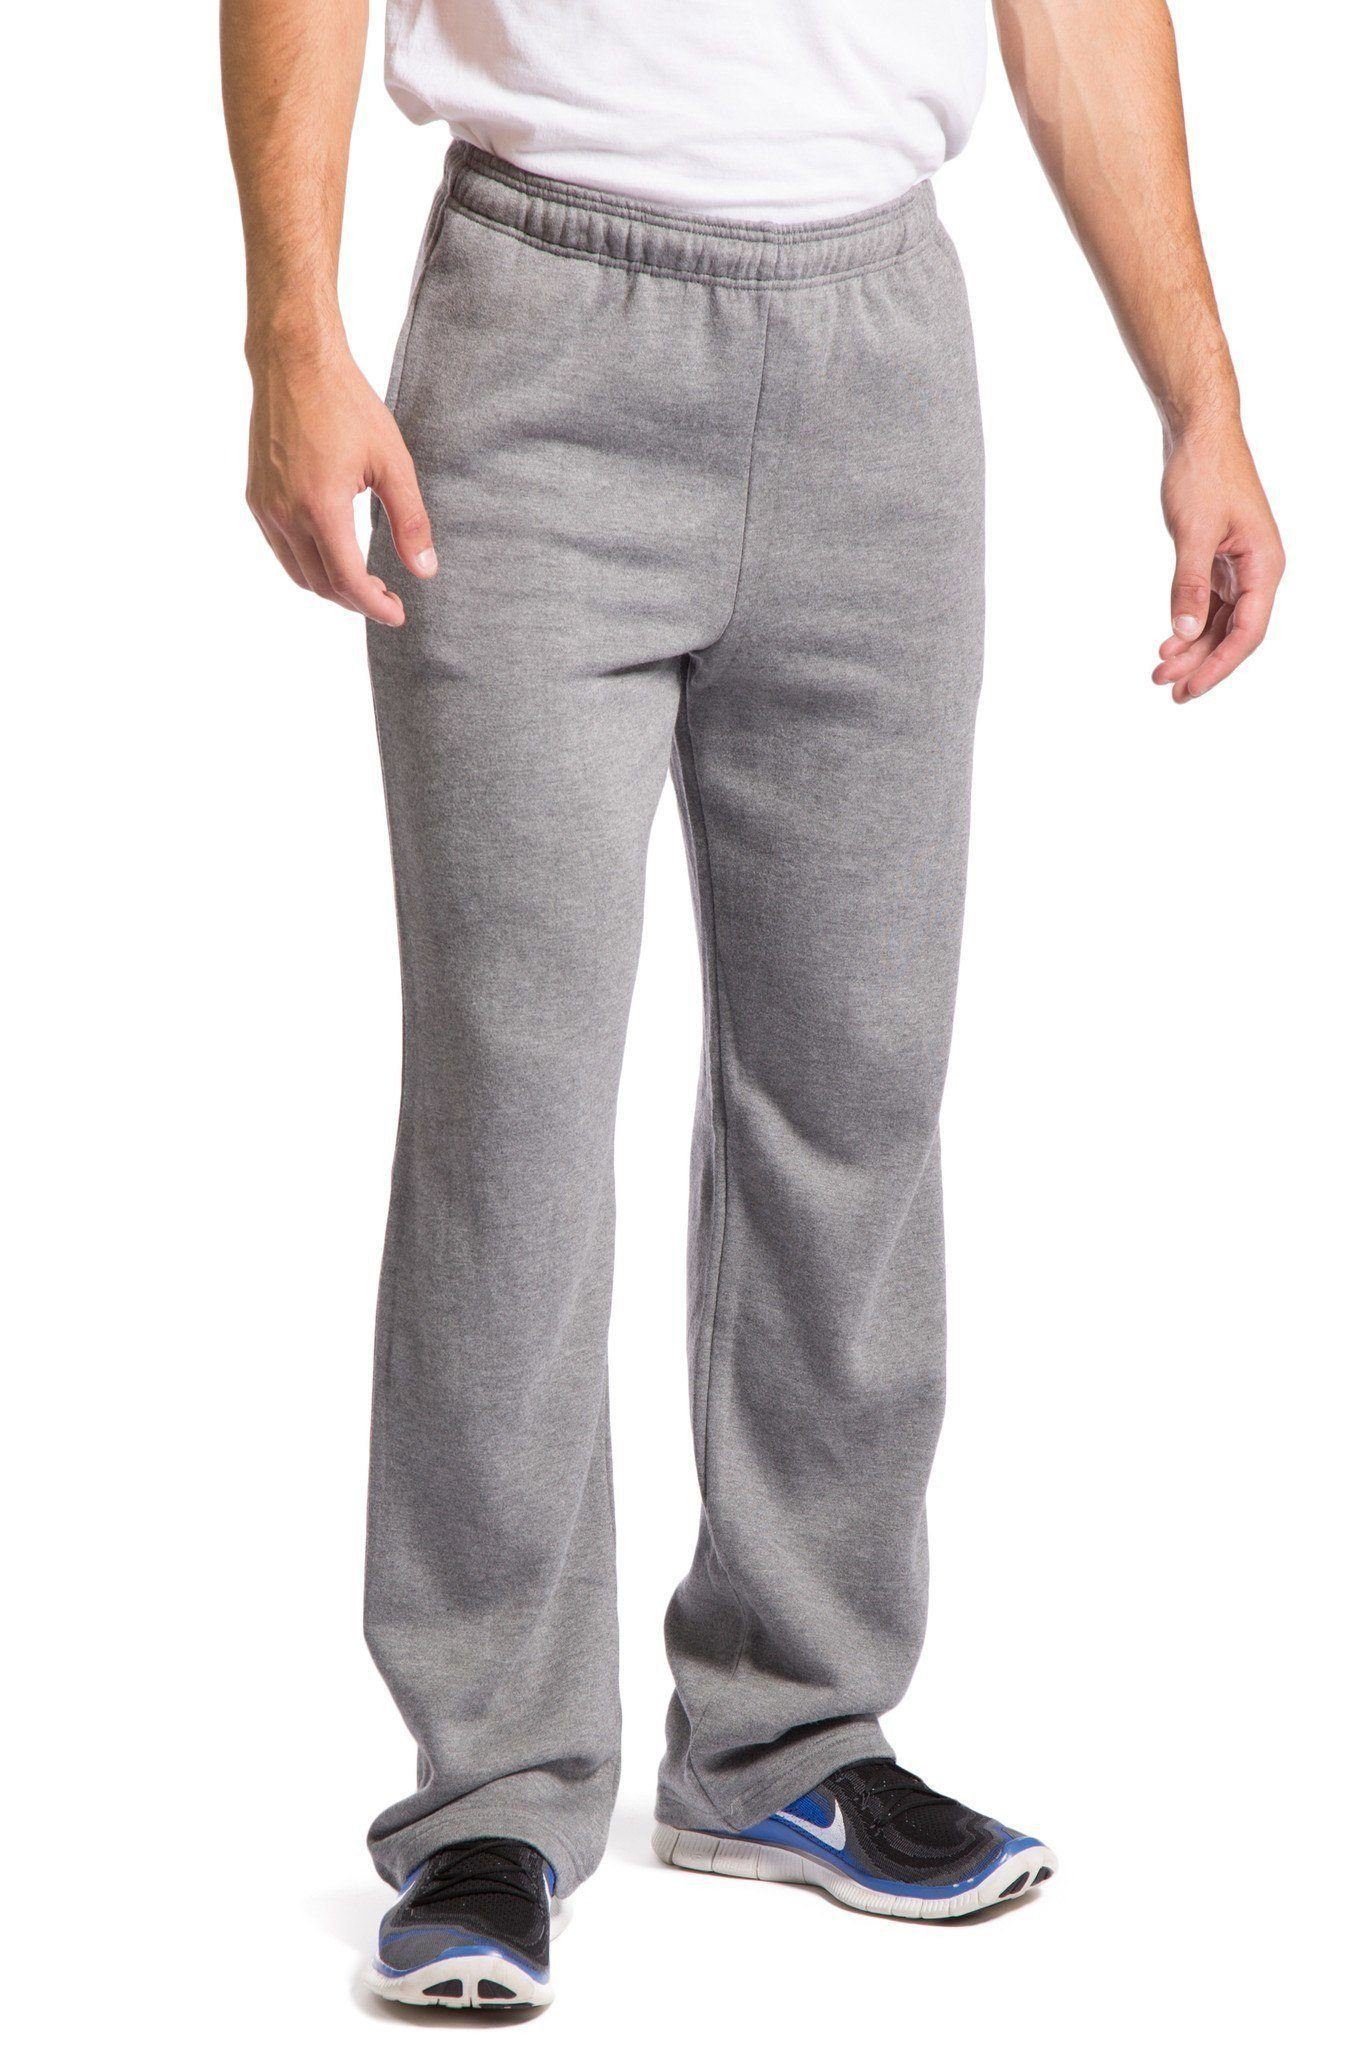 Mens Sweatpants | Ecofrabic Mens Athletic Pants | Fishers Finery